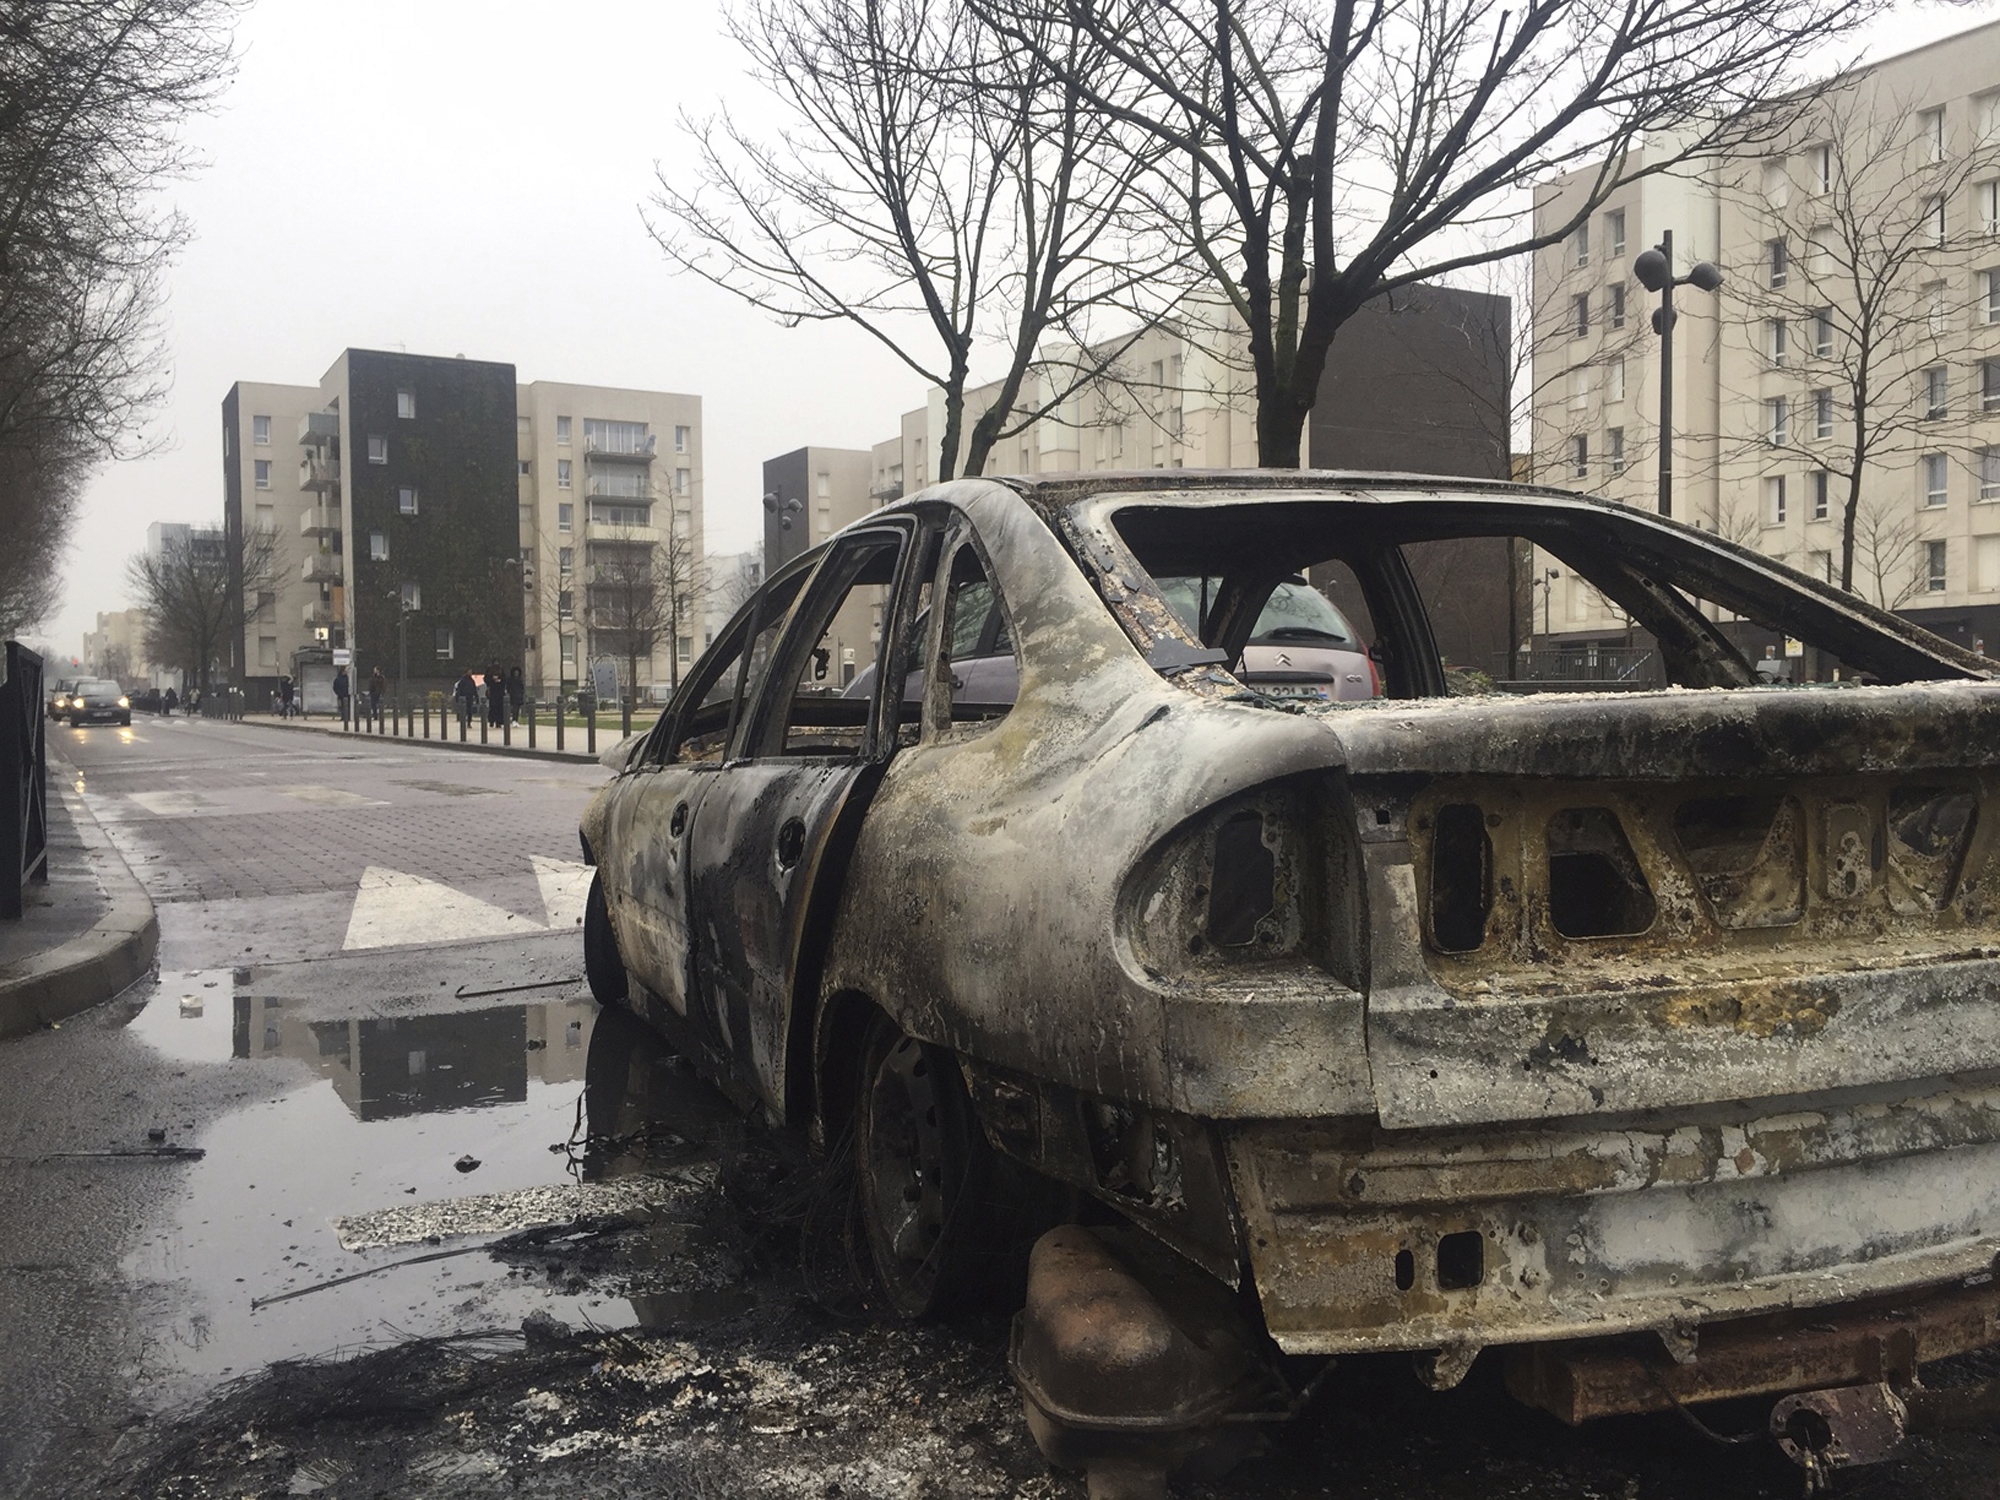 Wreckage of a car after it was burnt out by angry protesters on Monday night in support of a young black man who authorities allege was sodomized by a police officer's baton last week during a police operation that targeted drug traffickers, in Aulnay-sous-Bois, north of Paris, France, Tuesday, Feb. 7, 2017. French police have said that 26 protesters were arrested during an eruption of violence against police in the Paris suburbs in which a police car was torched. (AP Photo/Alex Turnbull)